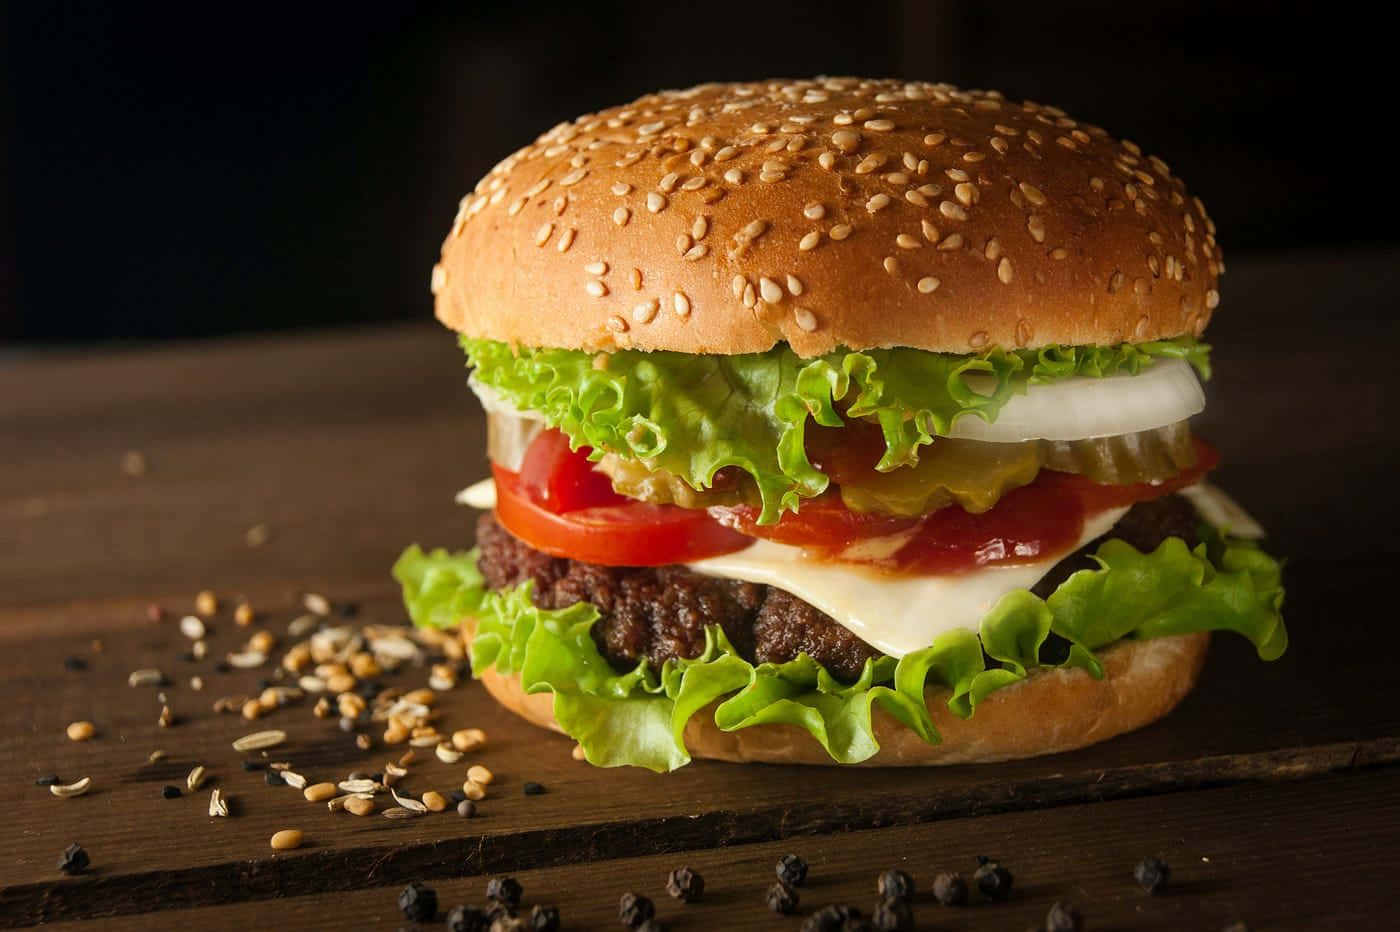 "Satisfy your craving with a classic burger from Burger King"